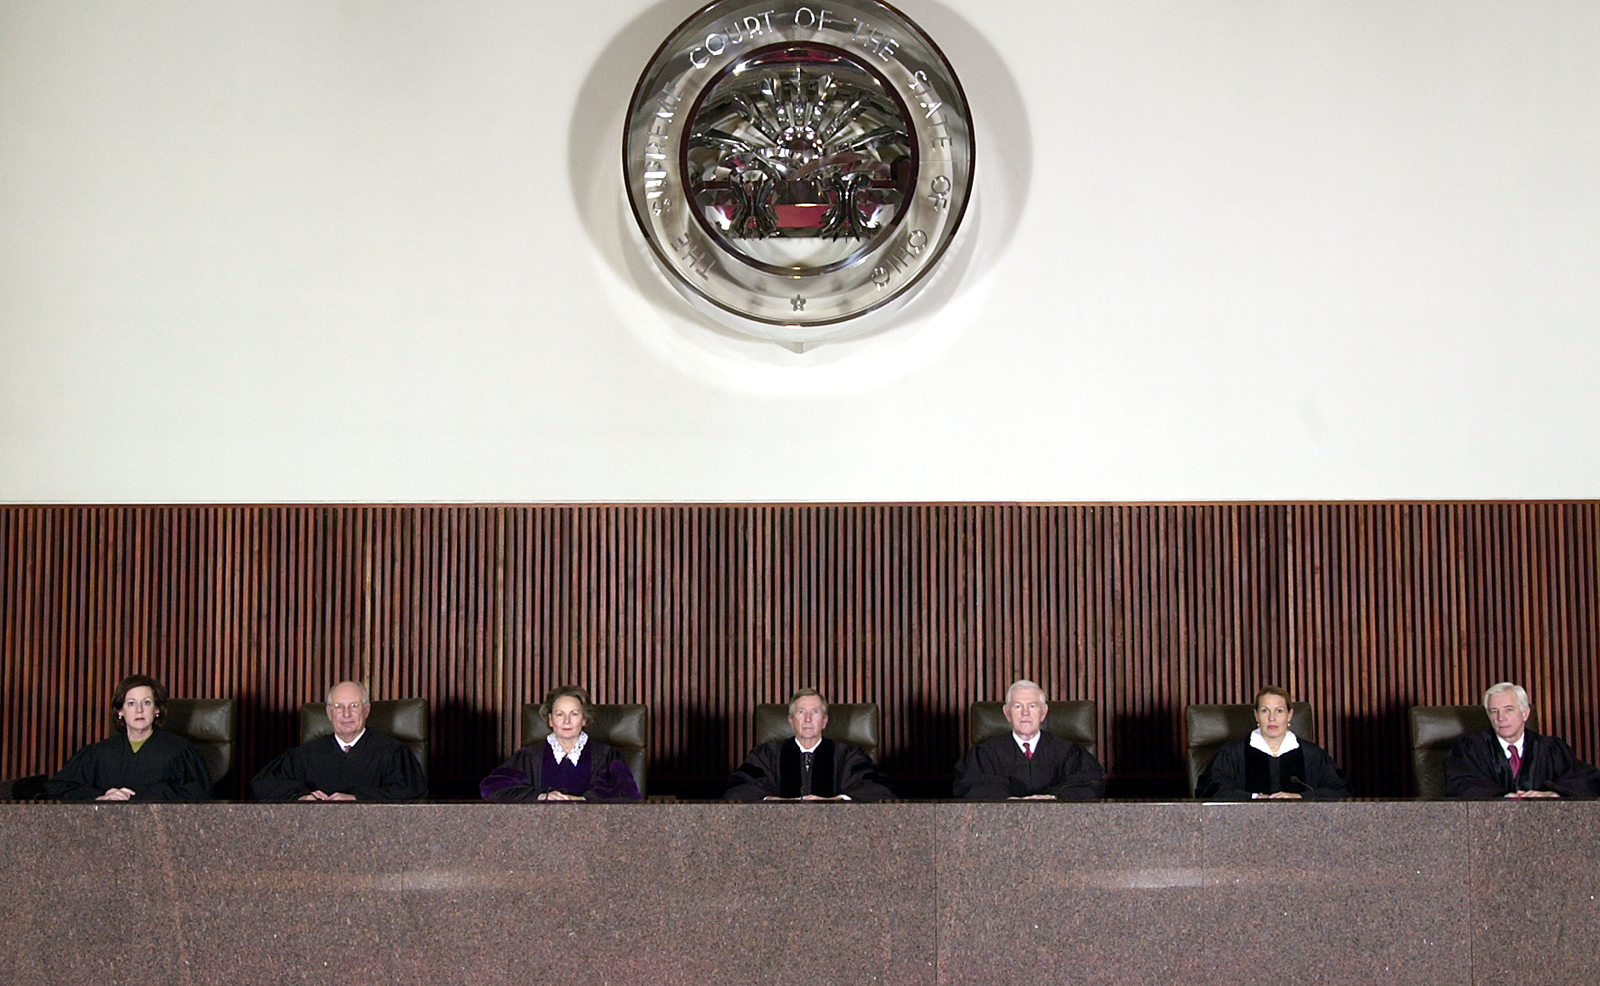 Image of the seven Ohio Supreme Court Justices sitting on the bench in the courtroom when the Court was located in the Rhodes State Office Tower